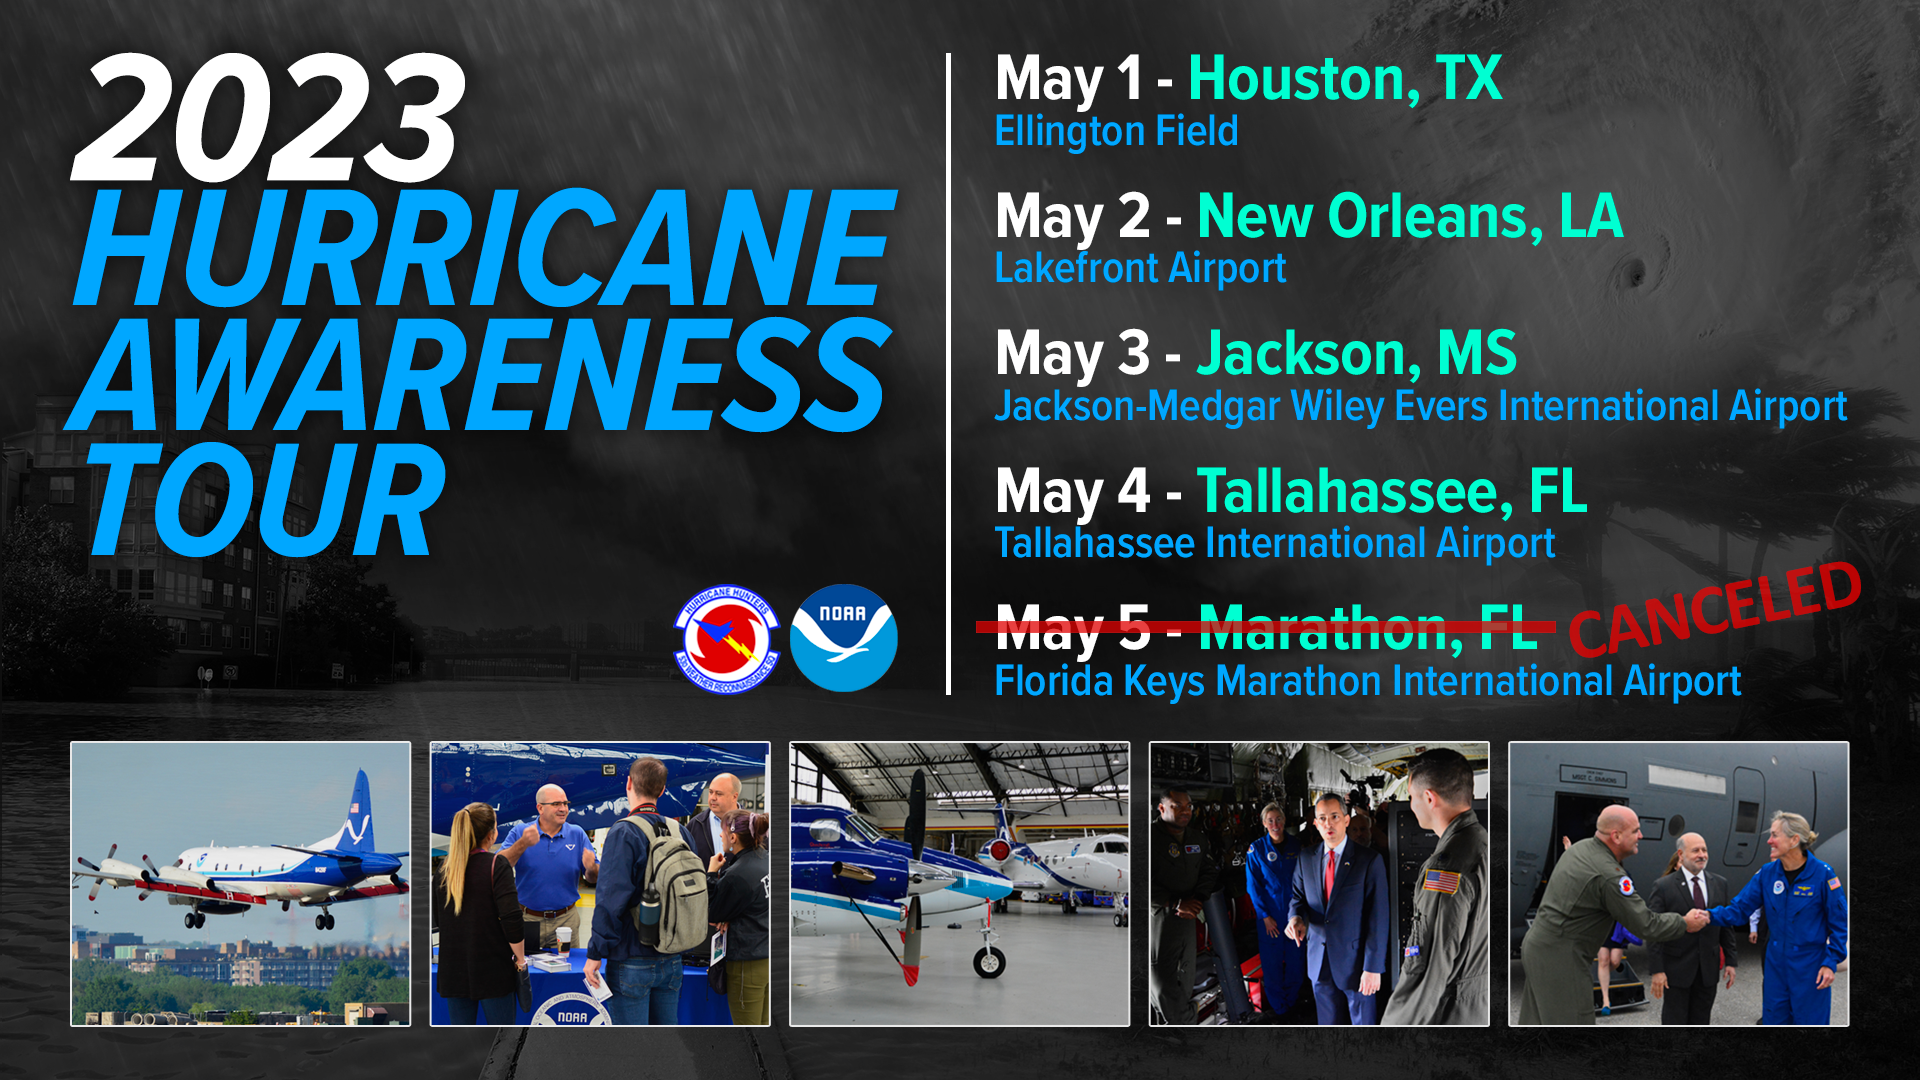 2023 Hurricane Awareness Tour: May 1 - Houston, TX - Ellington Field. May 2 -  New Orleans, LA - Lakefront Airport. May 3 - Jackson, MS - Jackson-Medgar Wiley Evers International Airport. May 4 - Tallahassee, FL - Tallahassee International Airport.